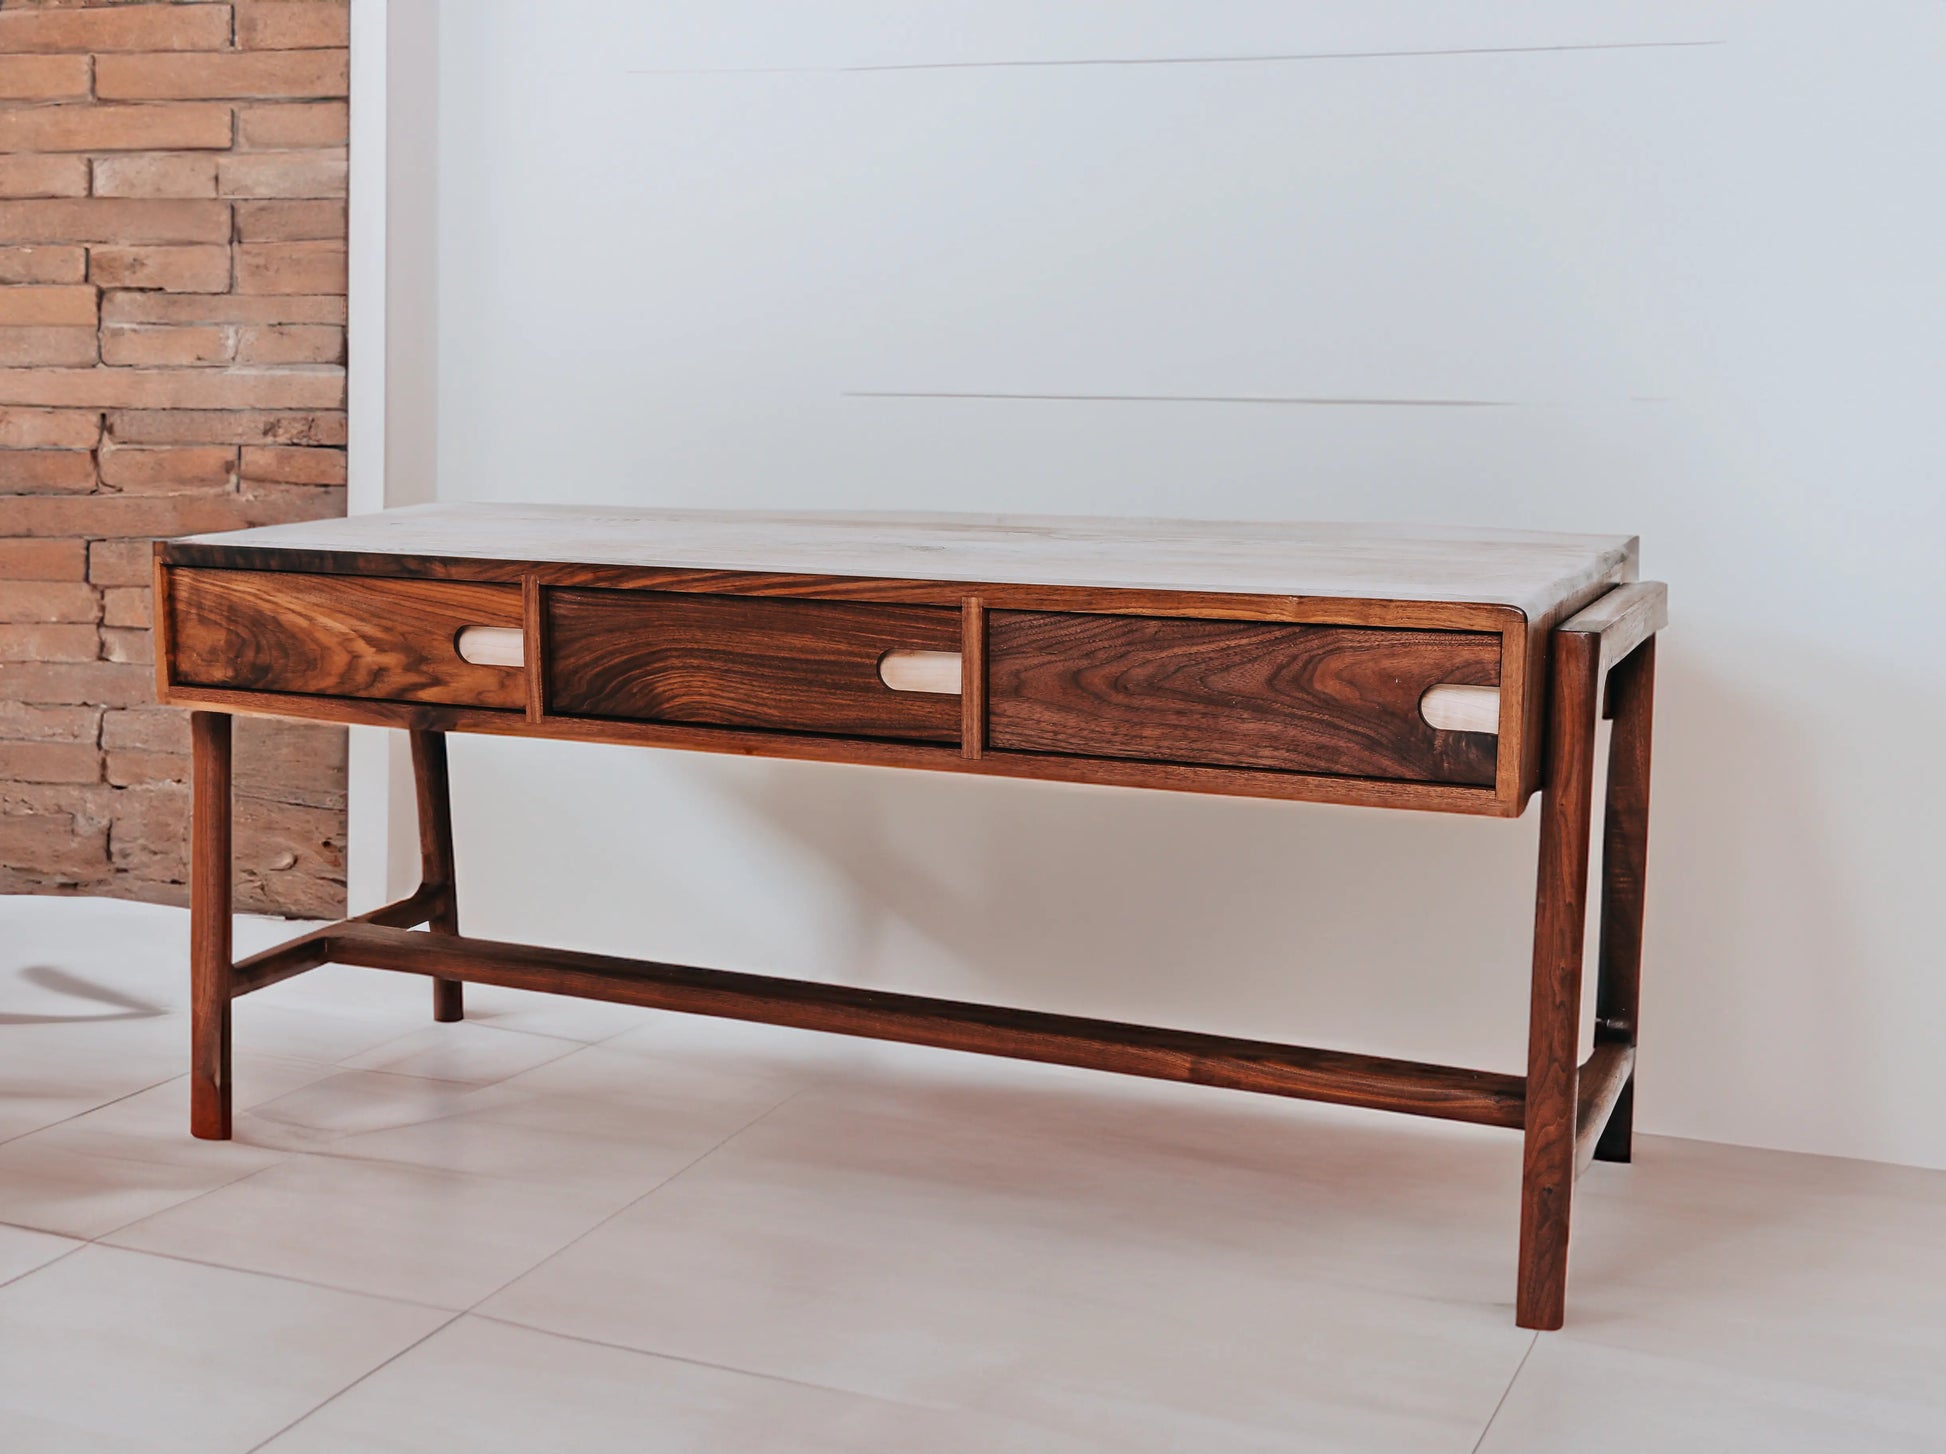 Designer black walnut coffee table Fjord with Scandinavian clean lines and sustainable rock maple detailing.